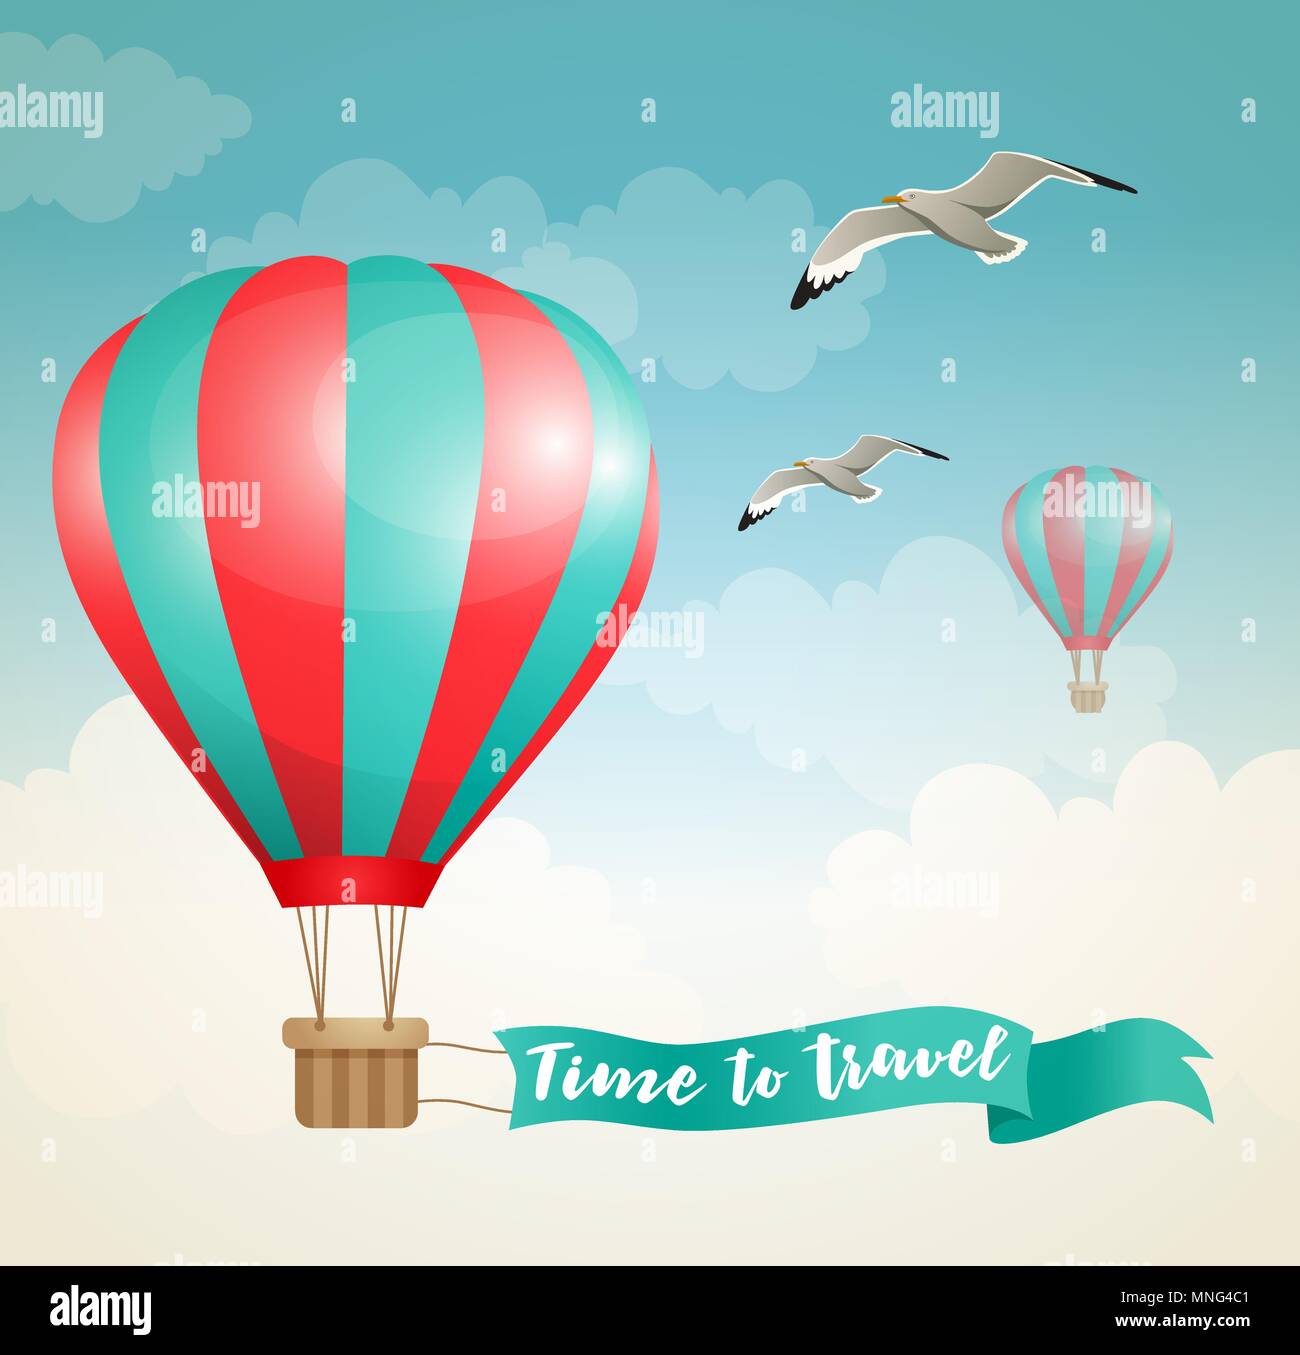 Travel background with air balloon and birds flying in the sky Stock Vector